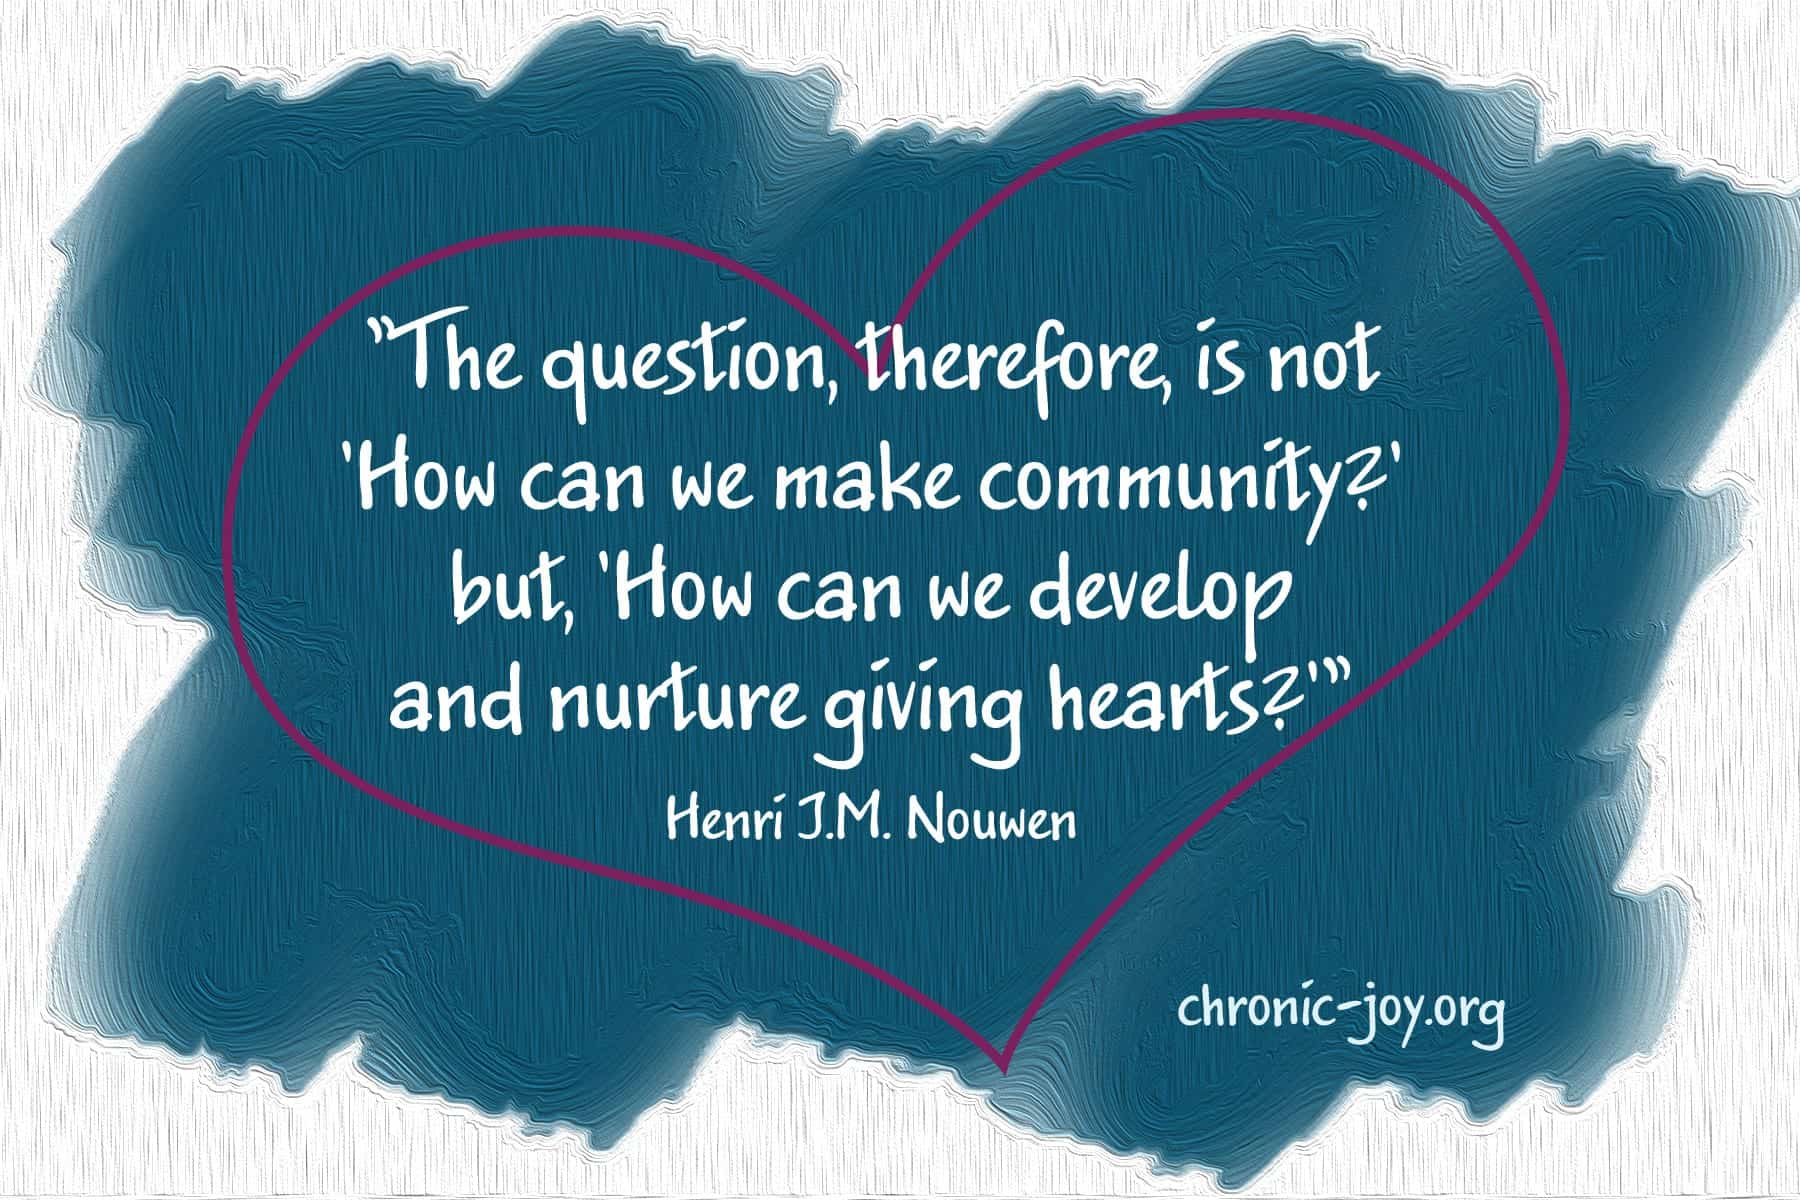 "The question, therefore, is not 'How can we make community?' but, 'How can we develop and nurture giving hearts?'" Henri J.M. Nouwen